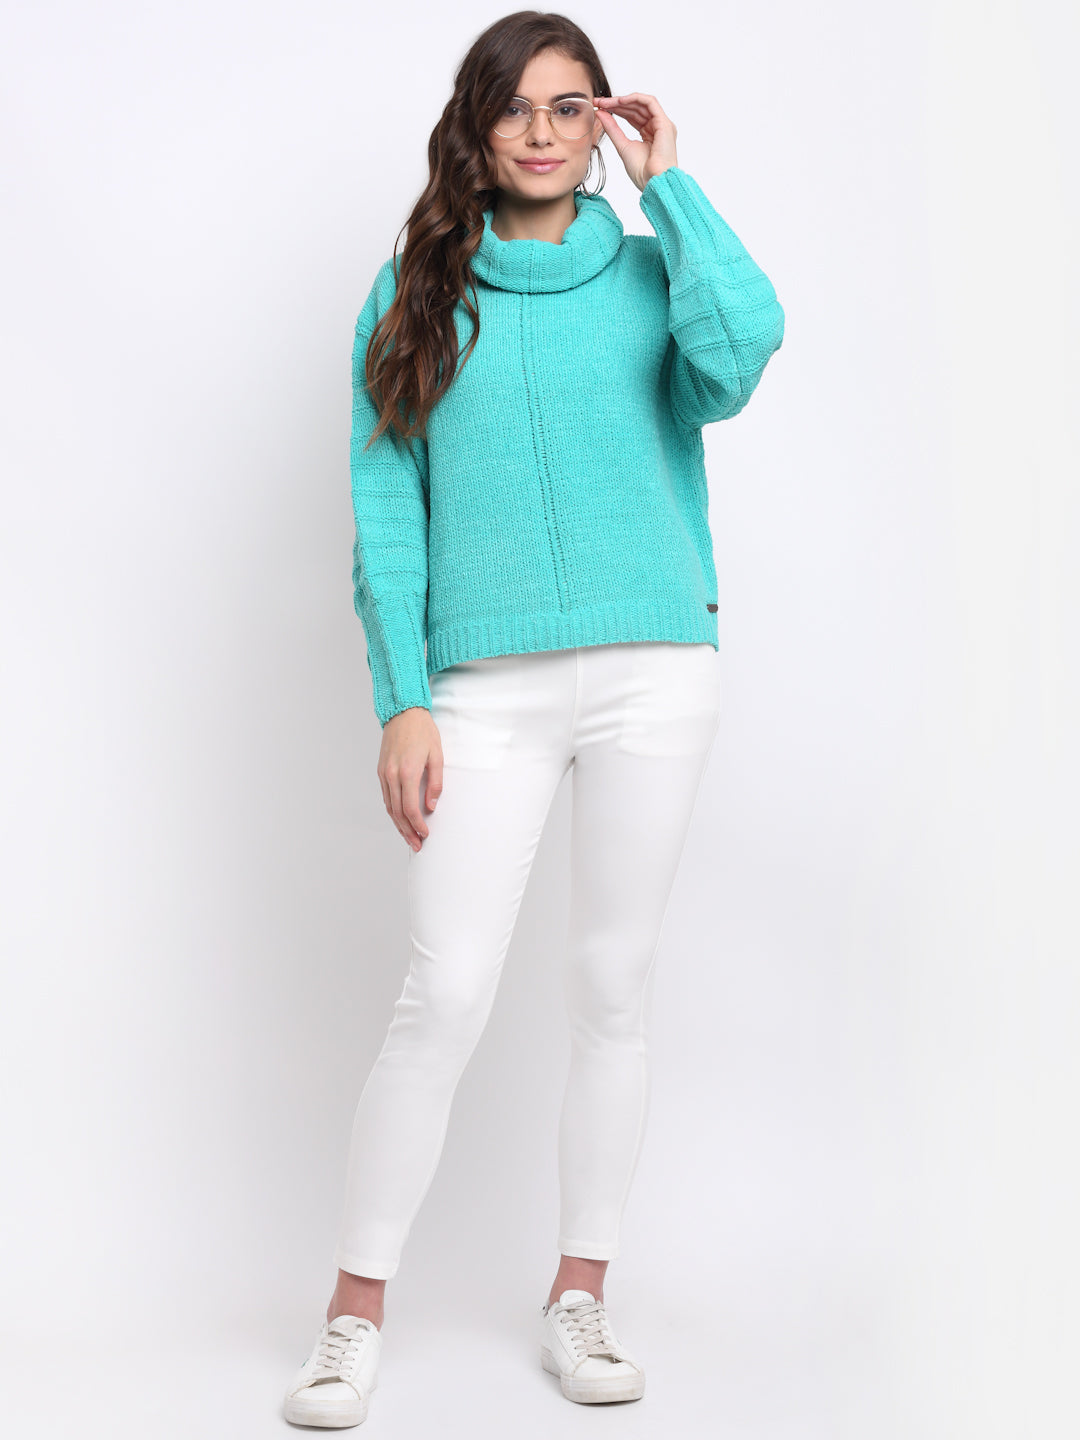 Women Teal Blue High Neck Loose Fit Knit Pullover